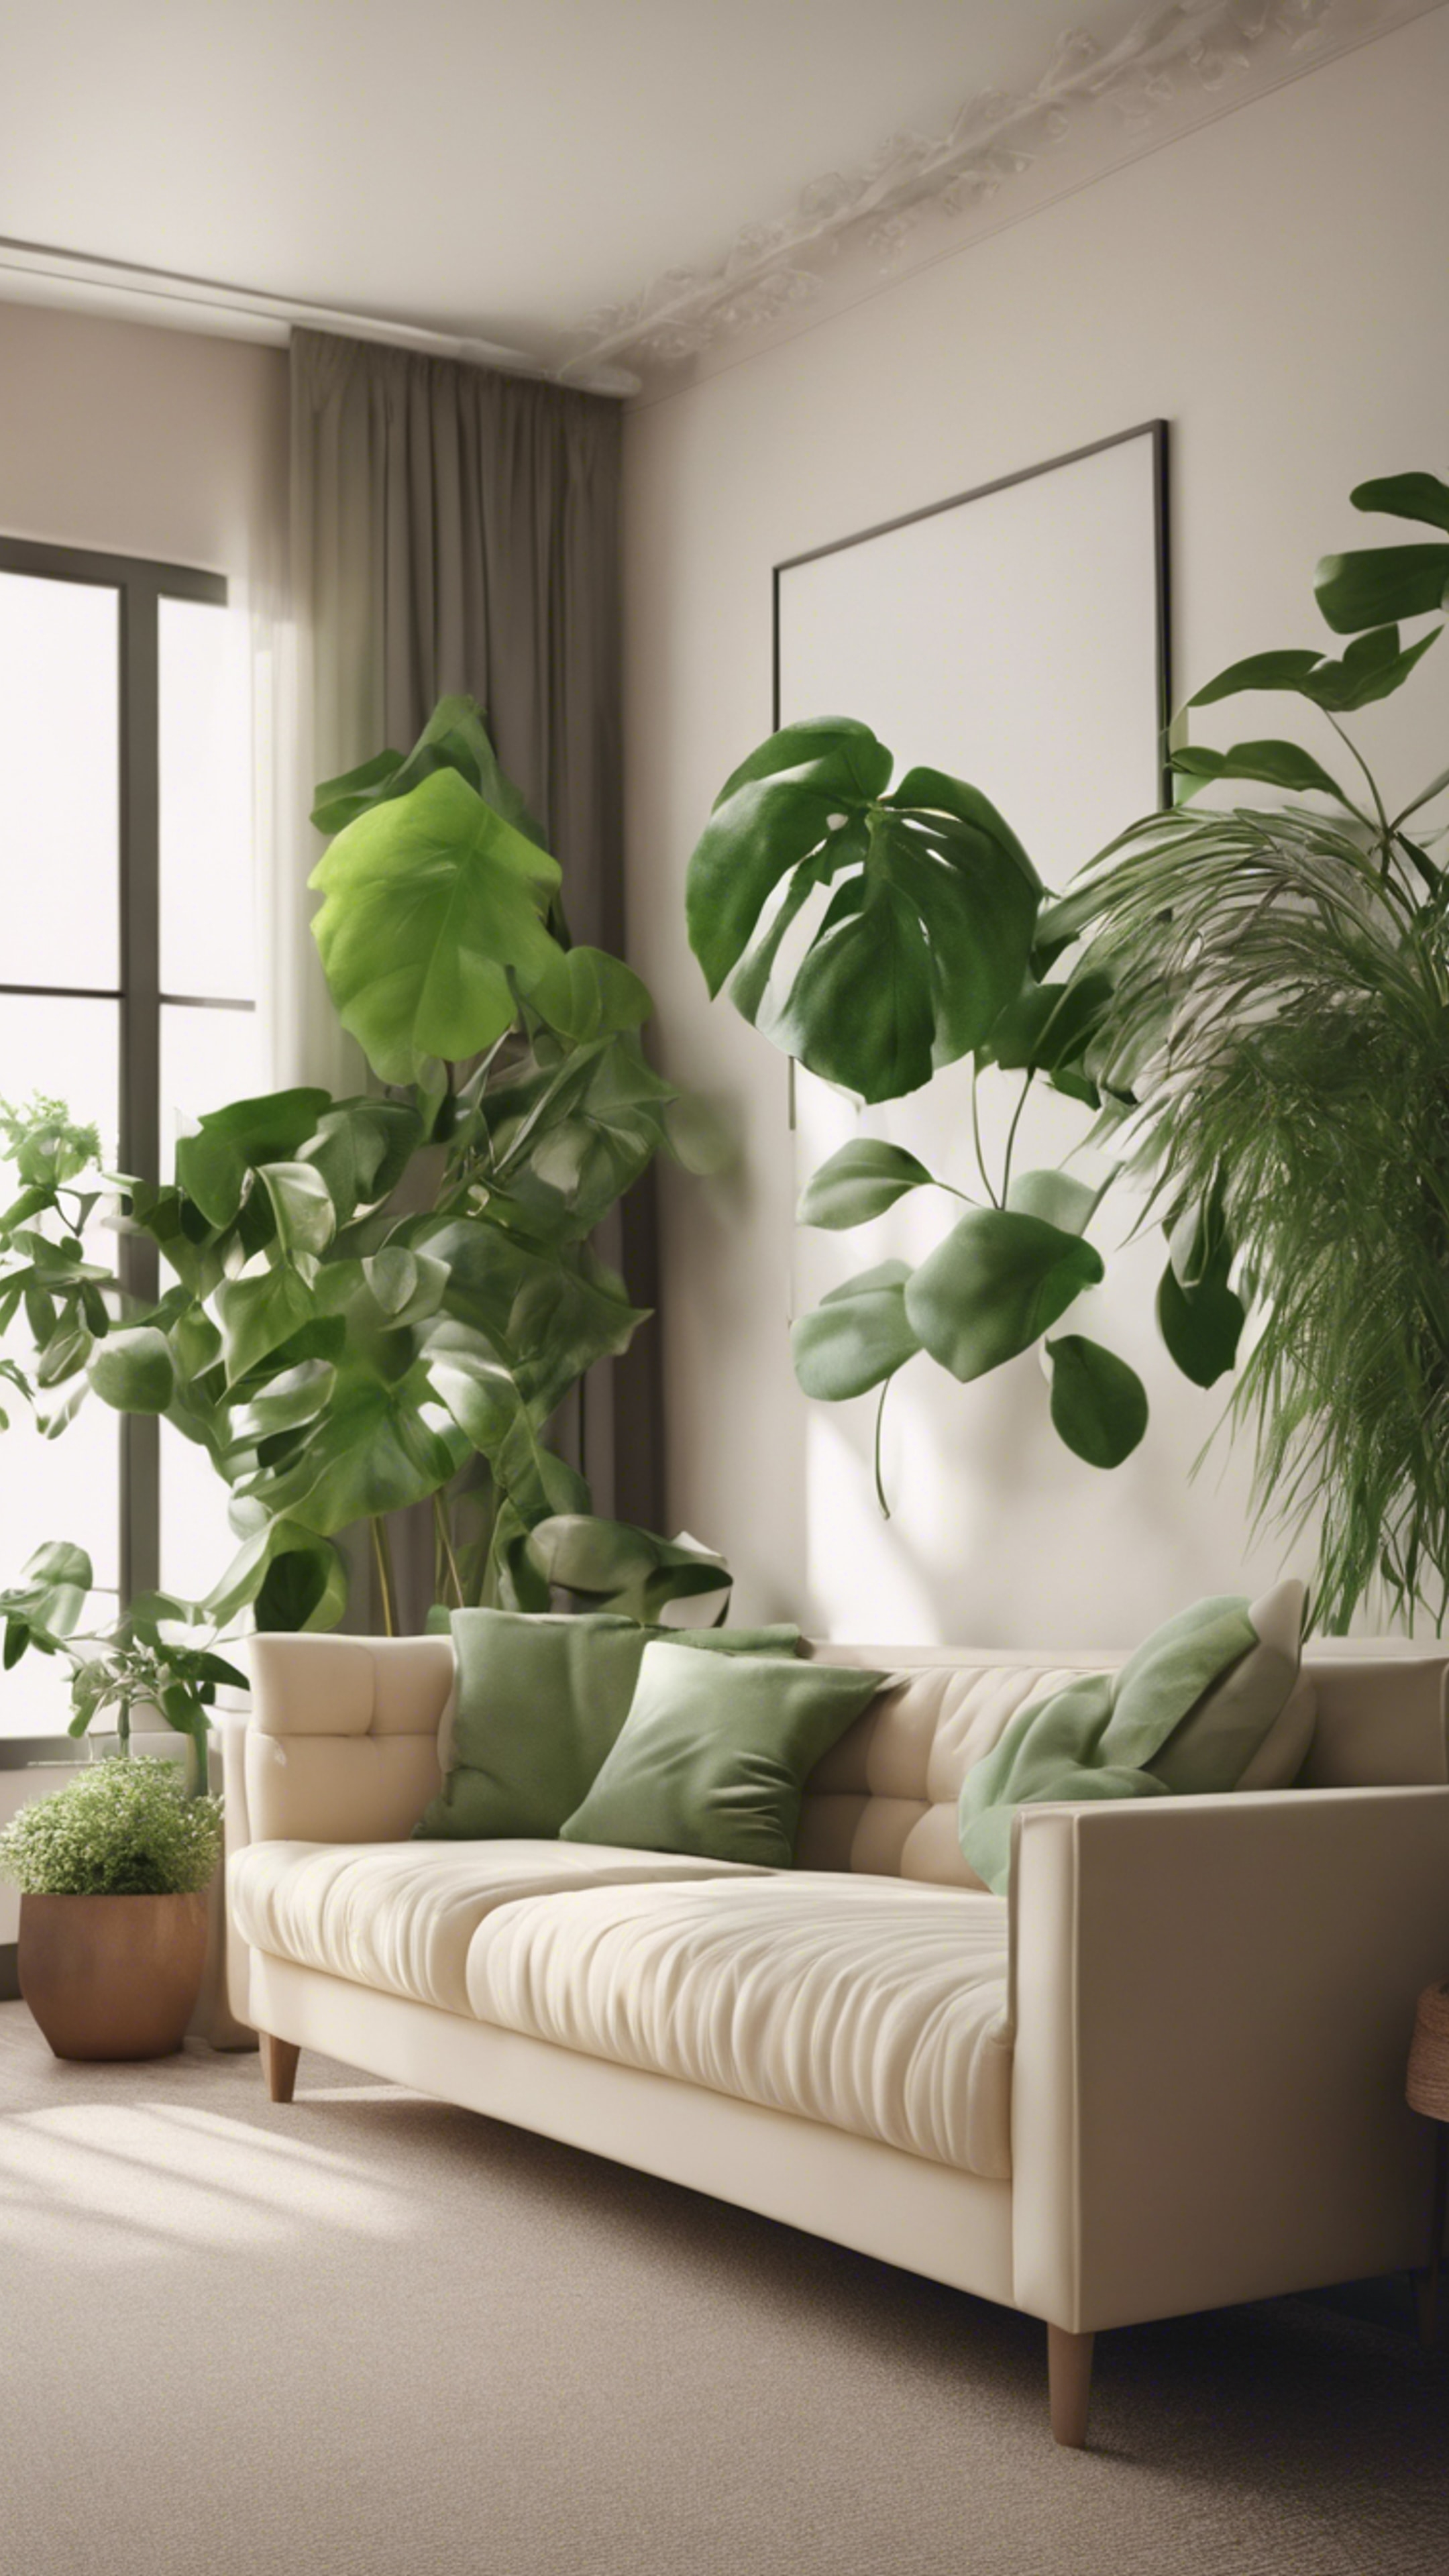 A simplistic living room featuring a cream couch contrasted with a natural green aesthetic of indoor plants Tapetai[57c4f329650745189cc4]